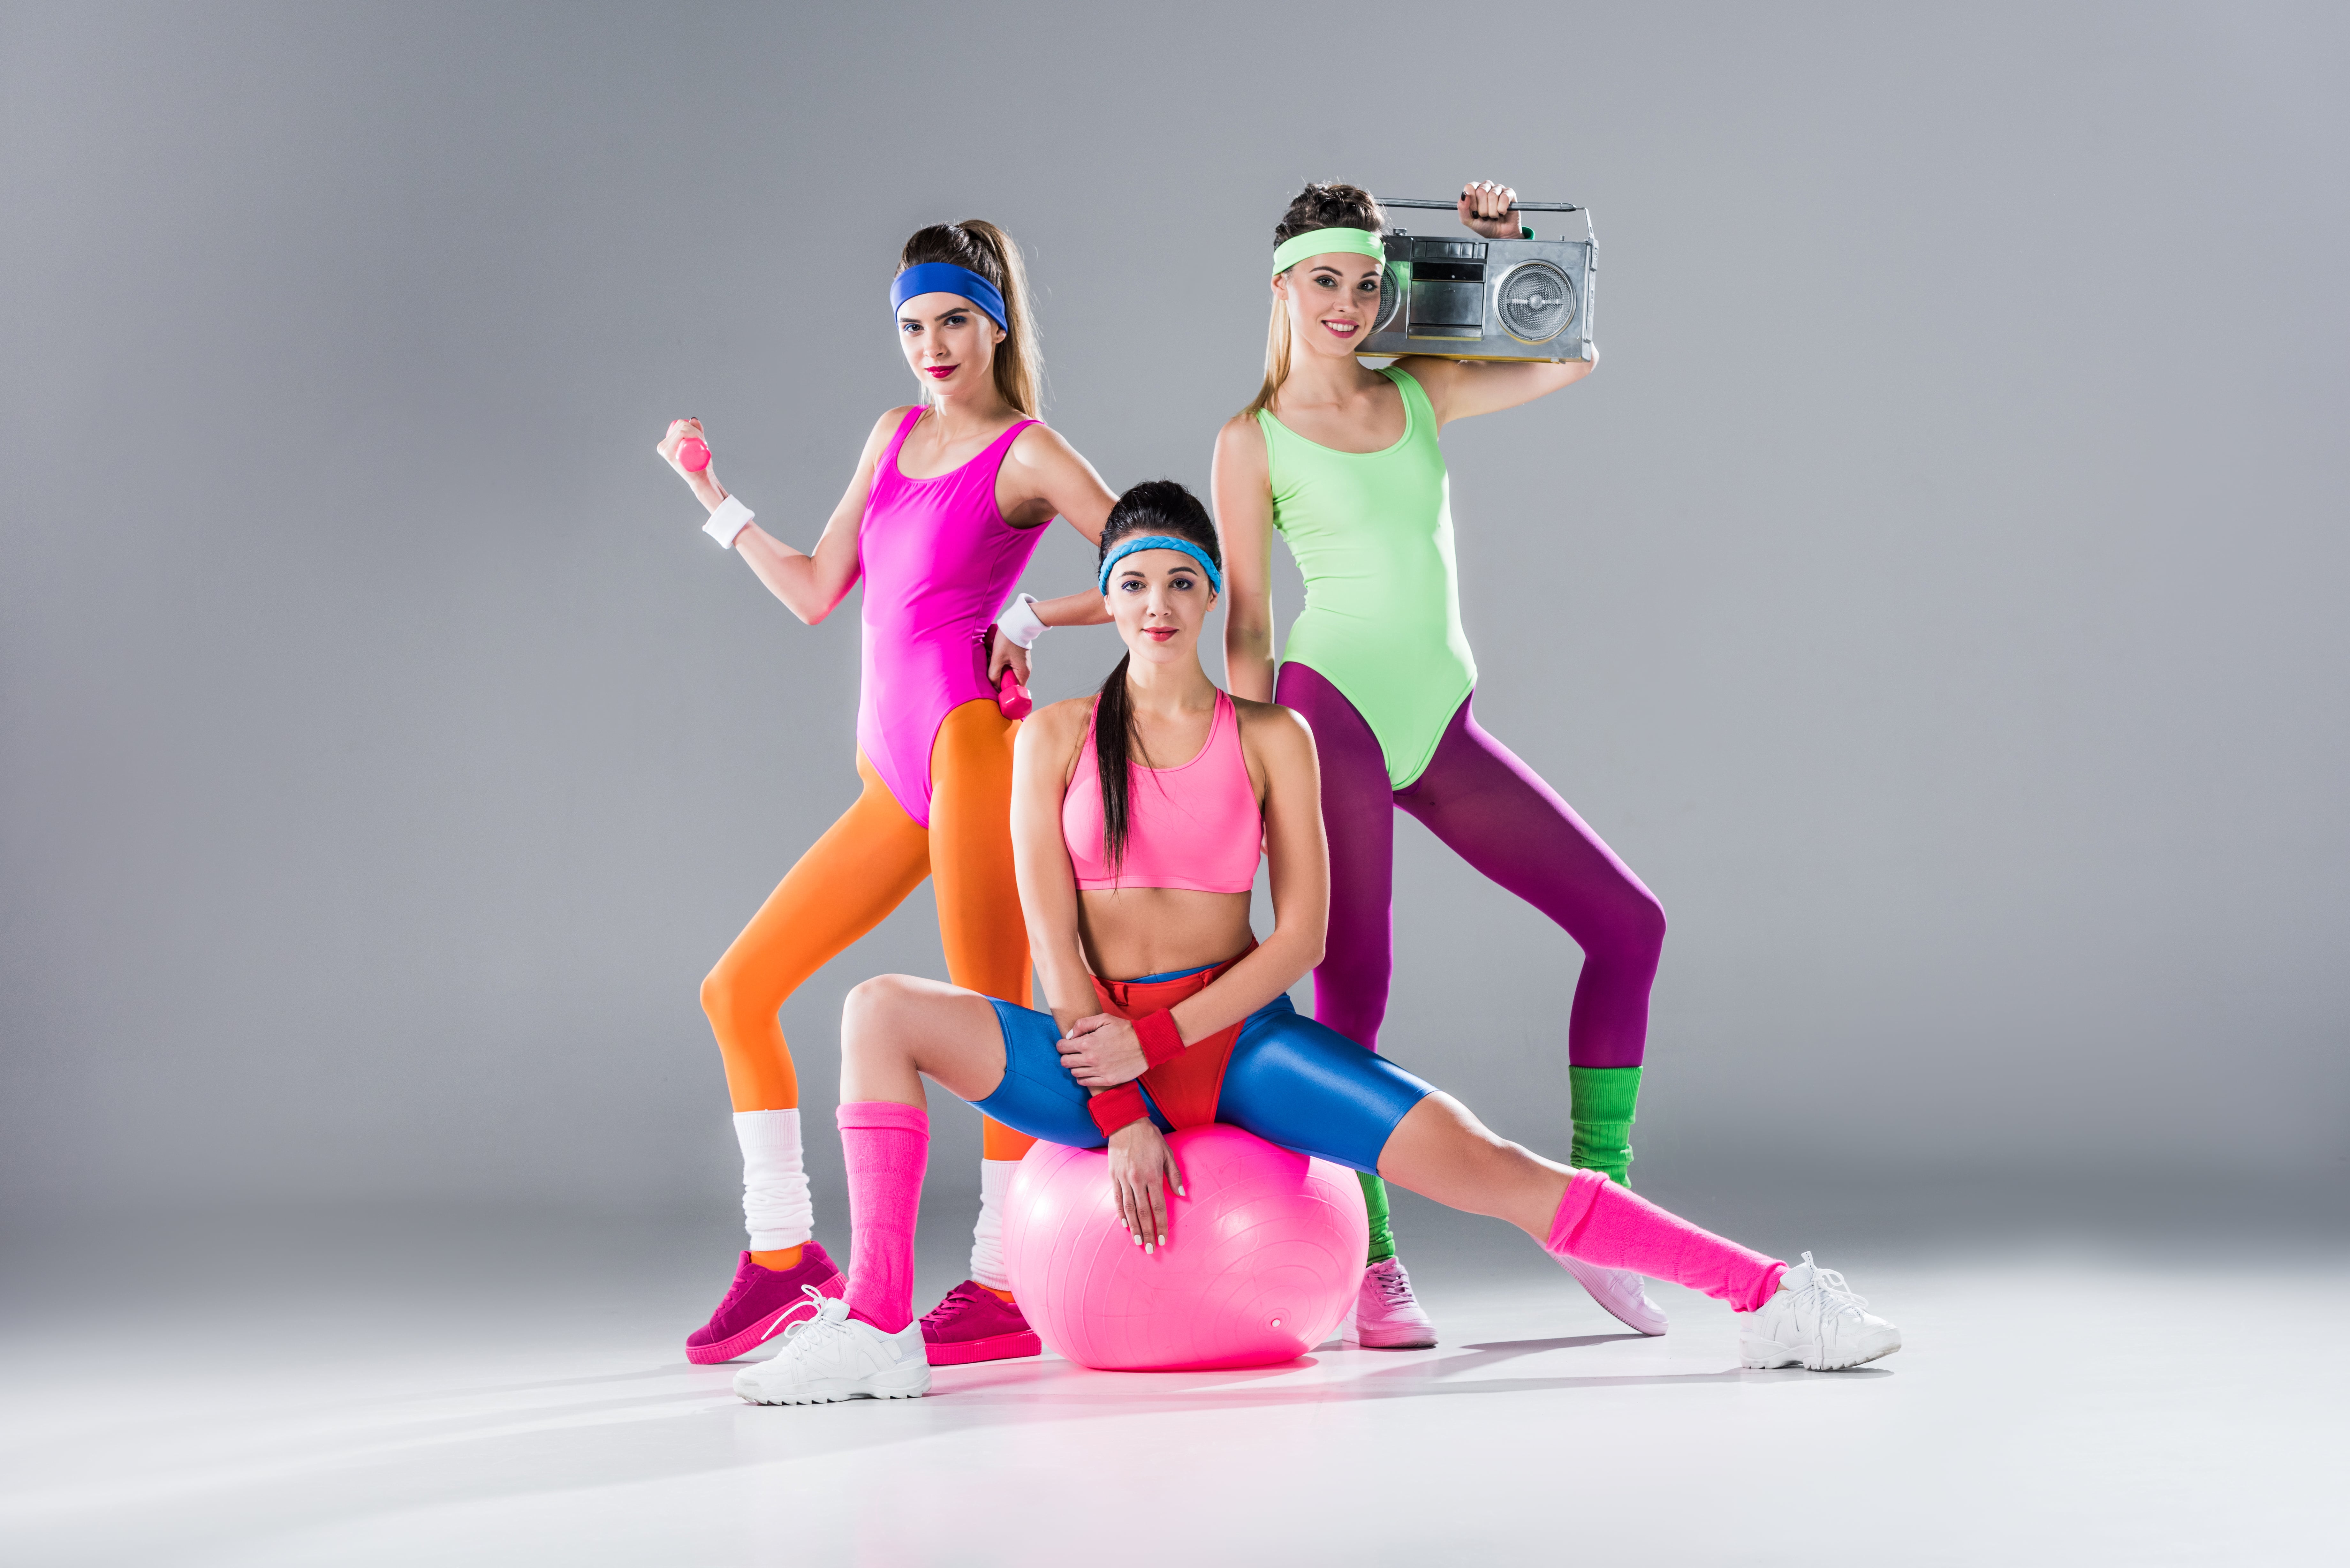 Retro 80's Workout Costume Men, Get Fit in Style with This Classic Aerobics  Outfit